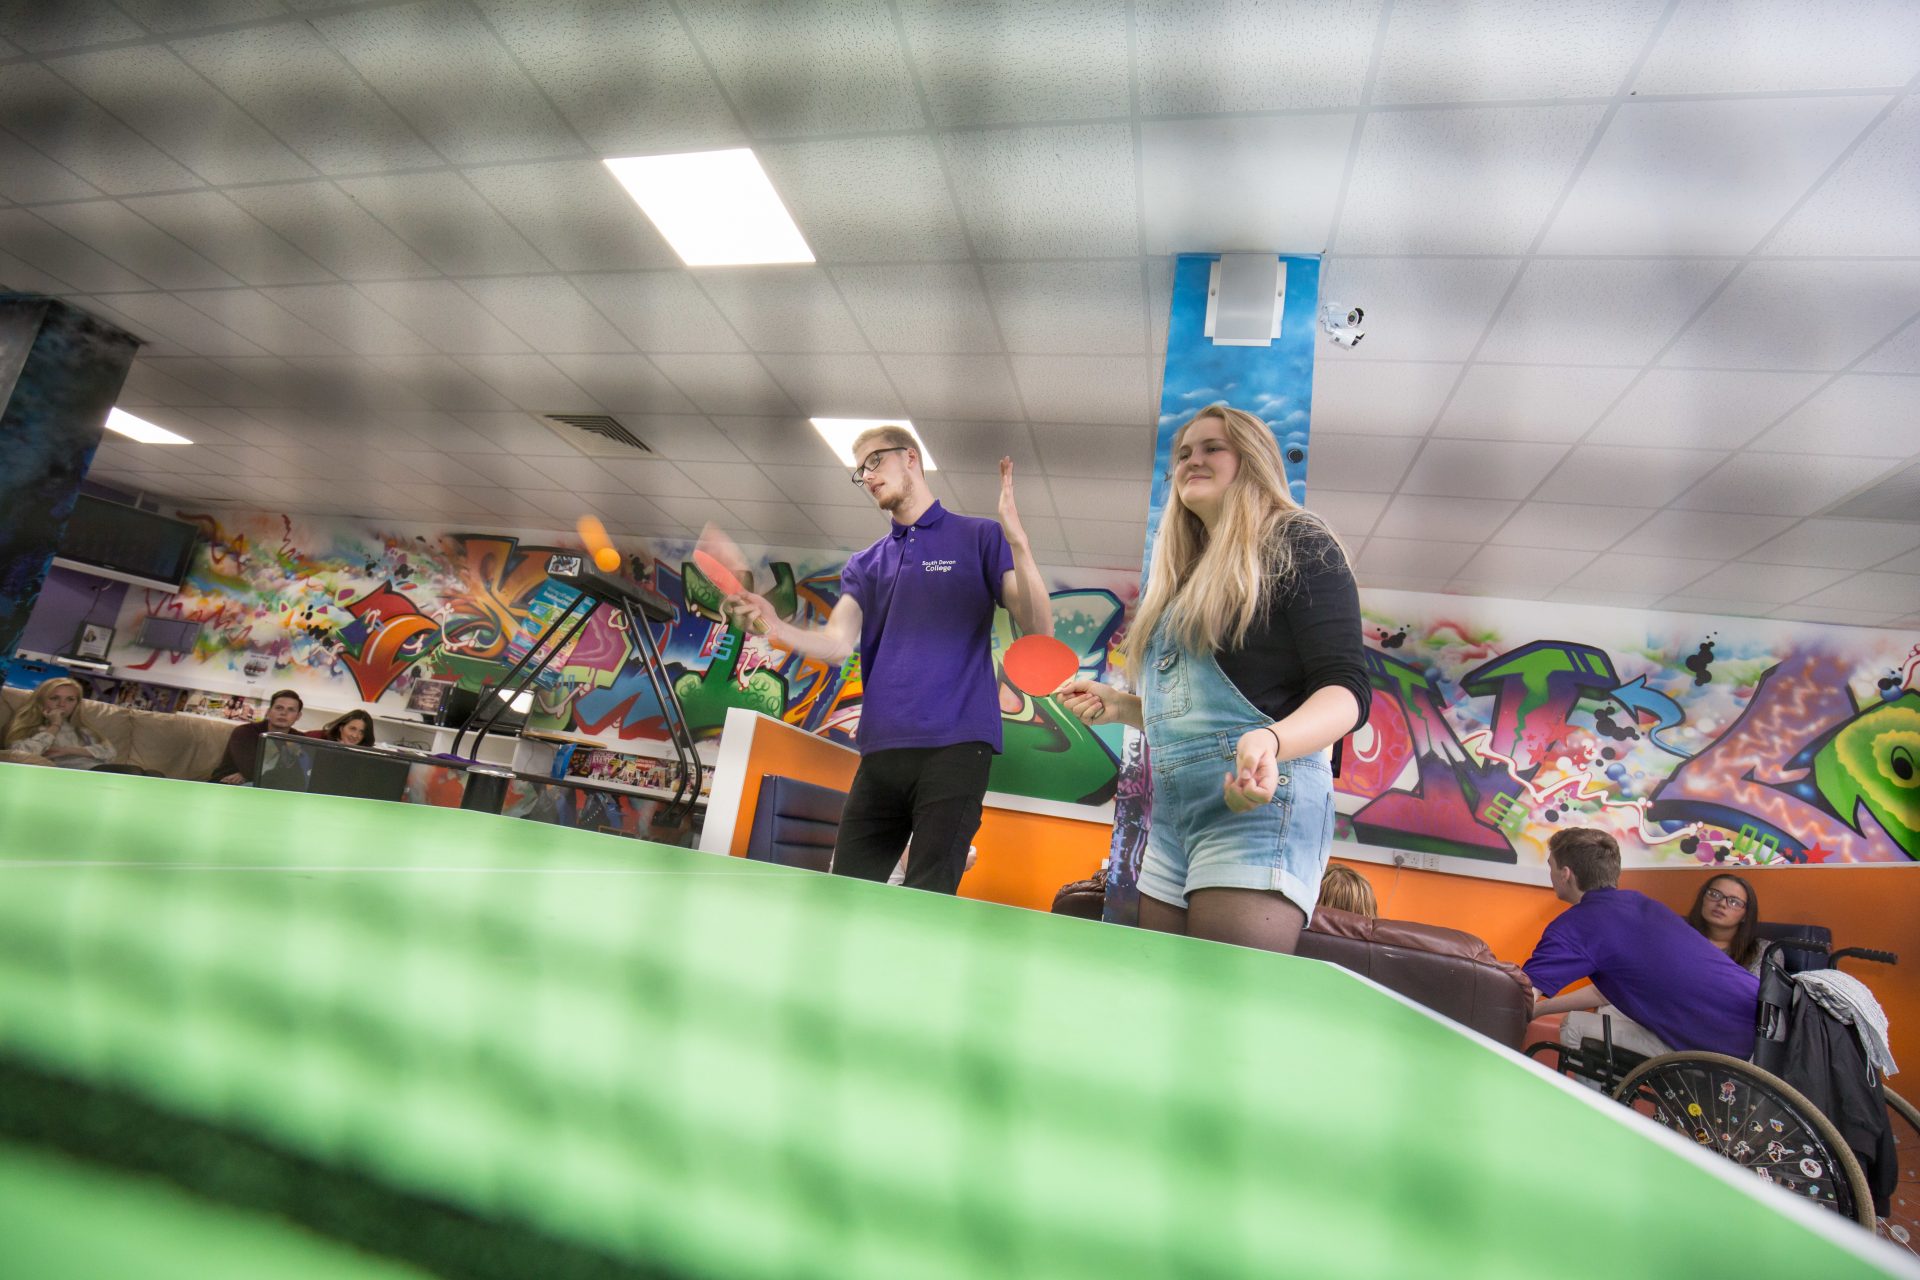 Students playing table tennis in the student union common room